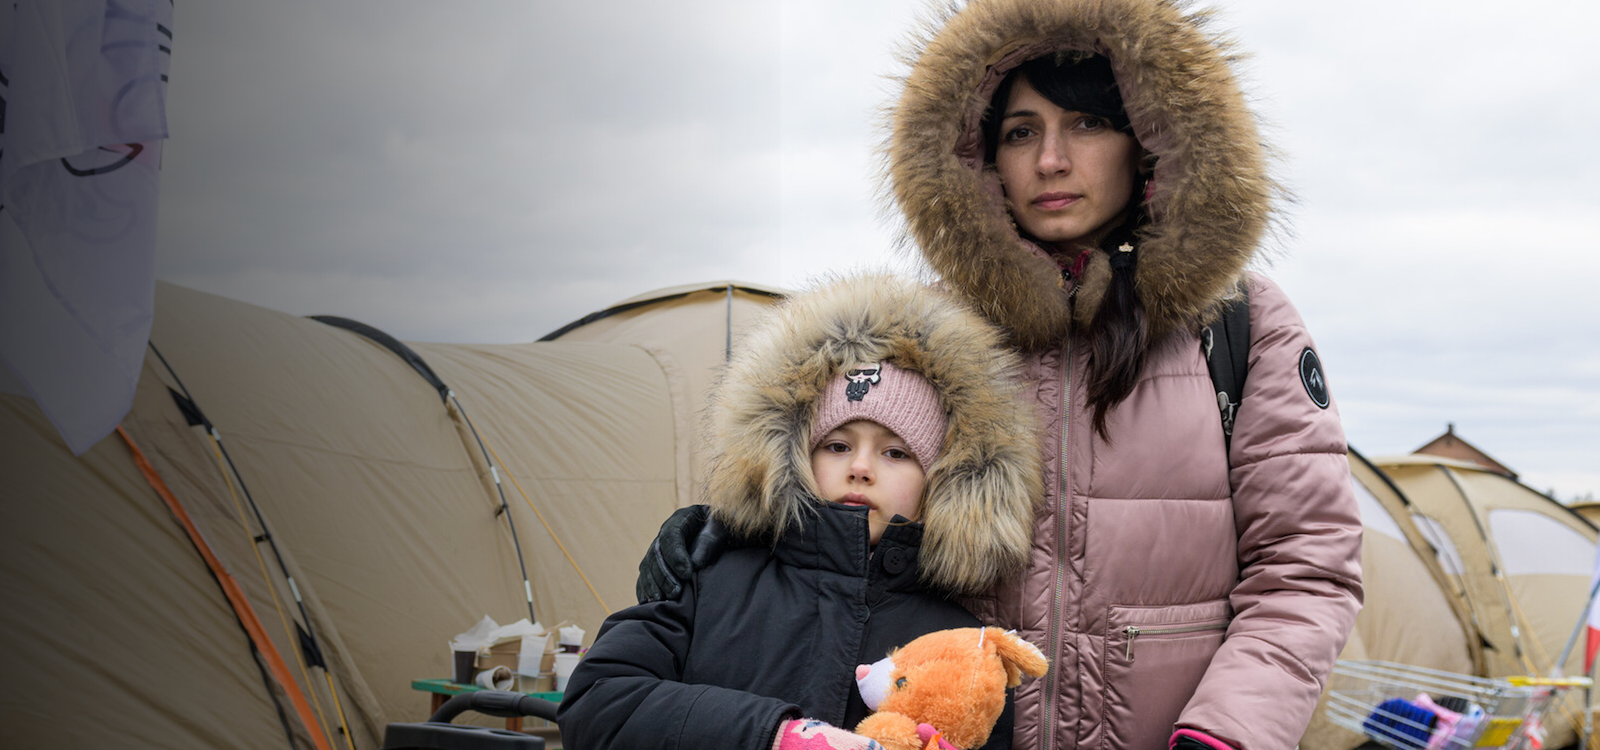 Mother and child displaced by Ukraine war